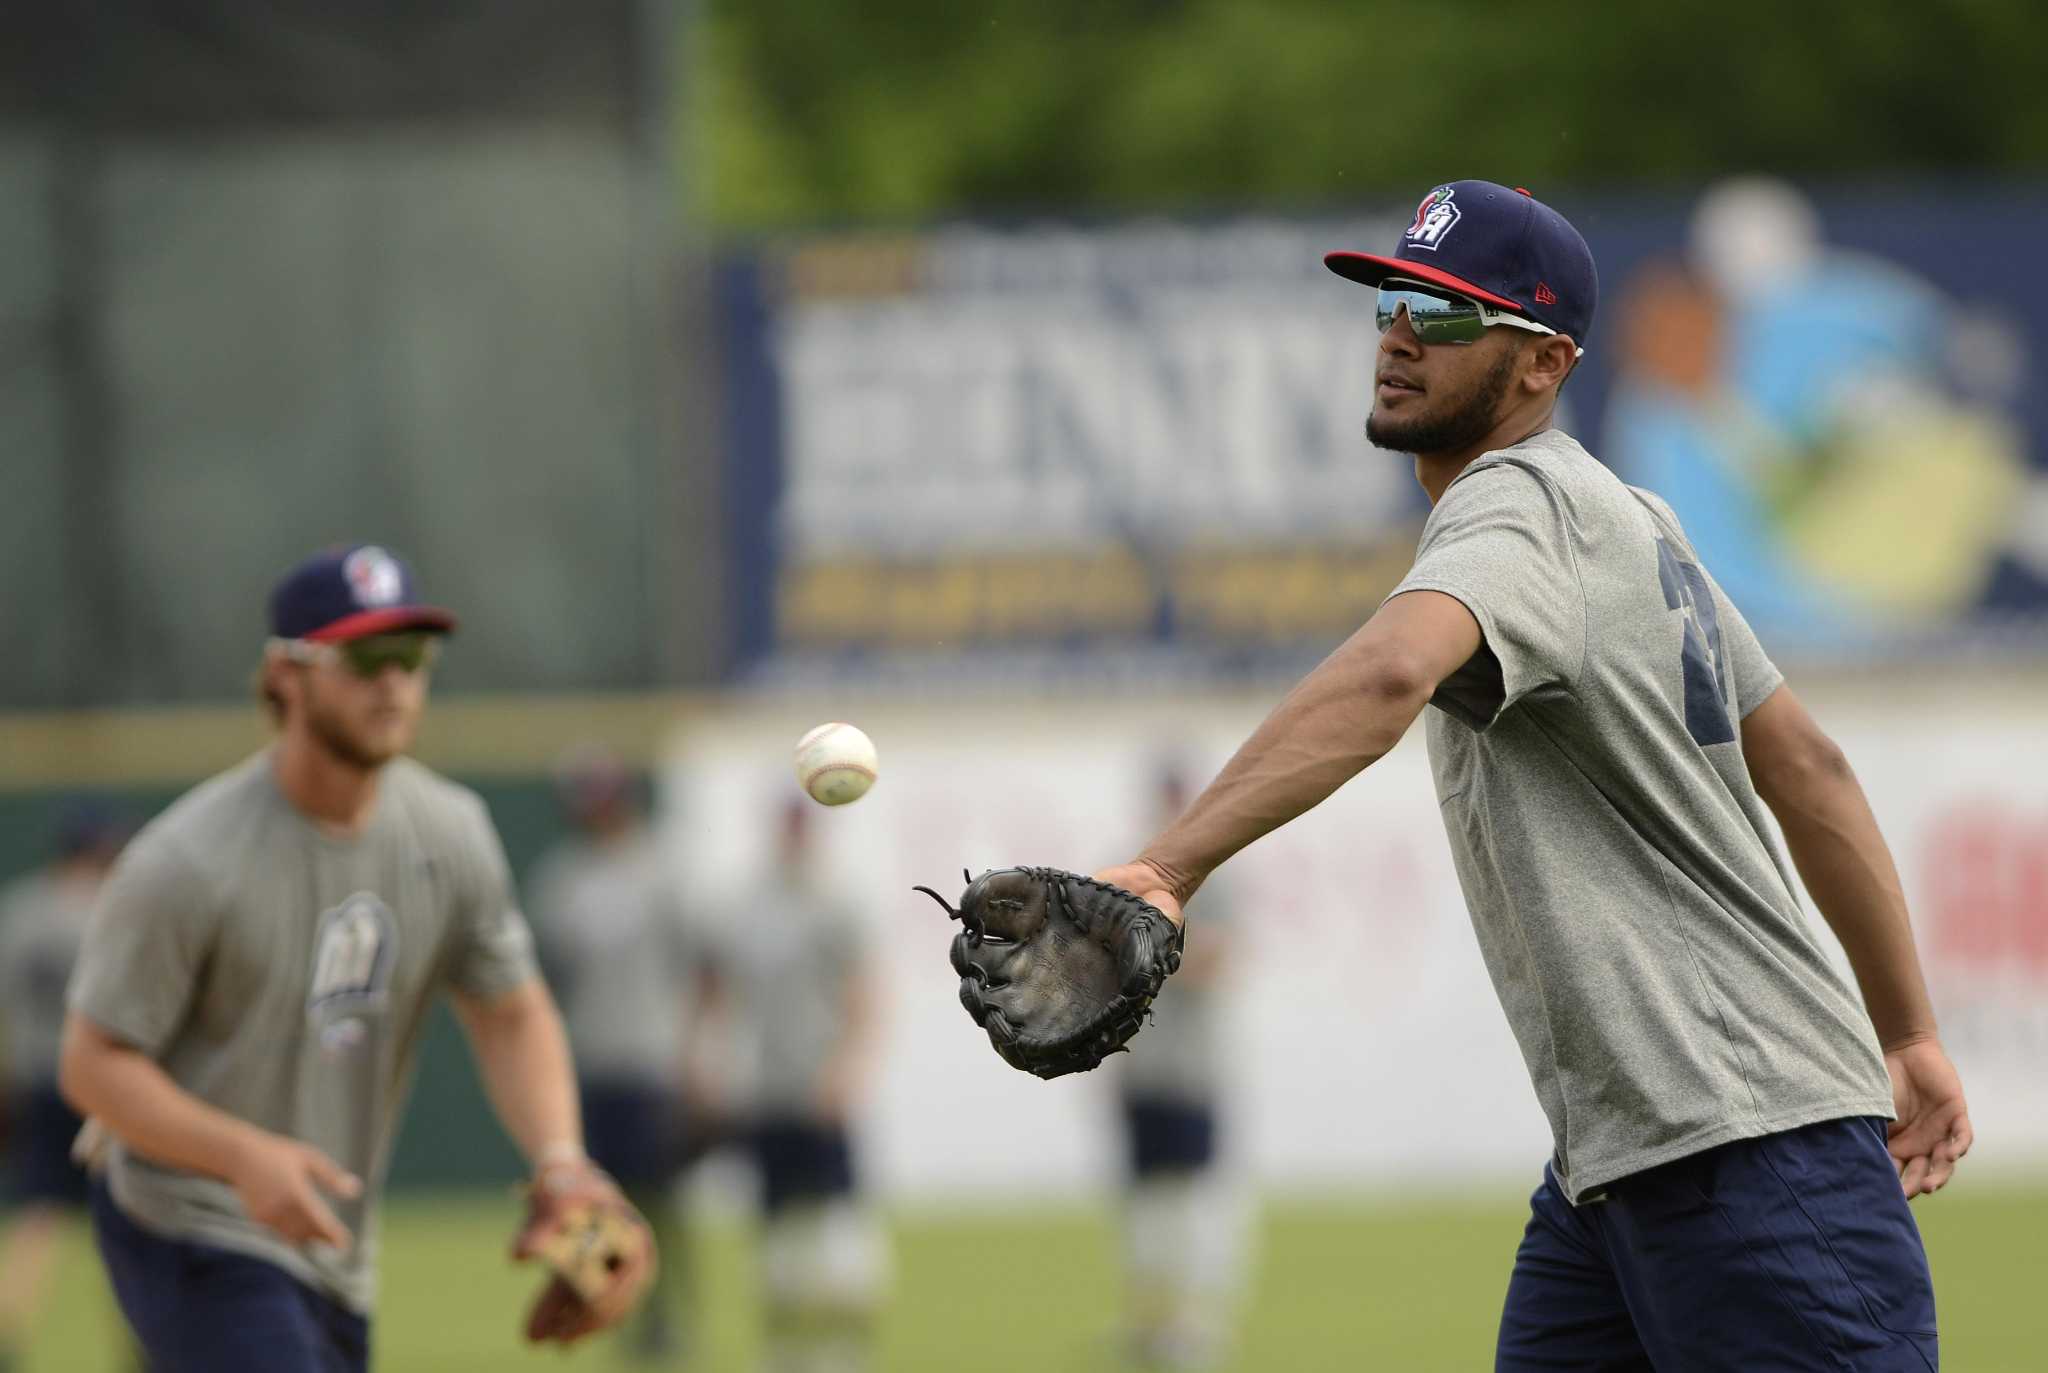 Missions' Tatis Jr. not looking like team's youngest